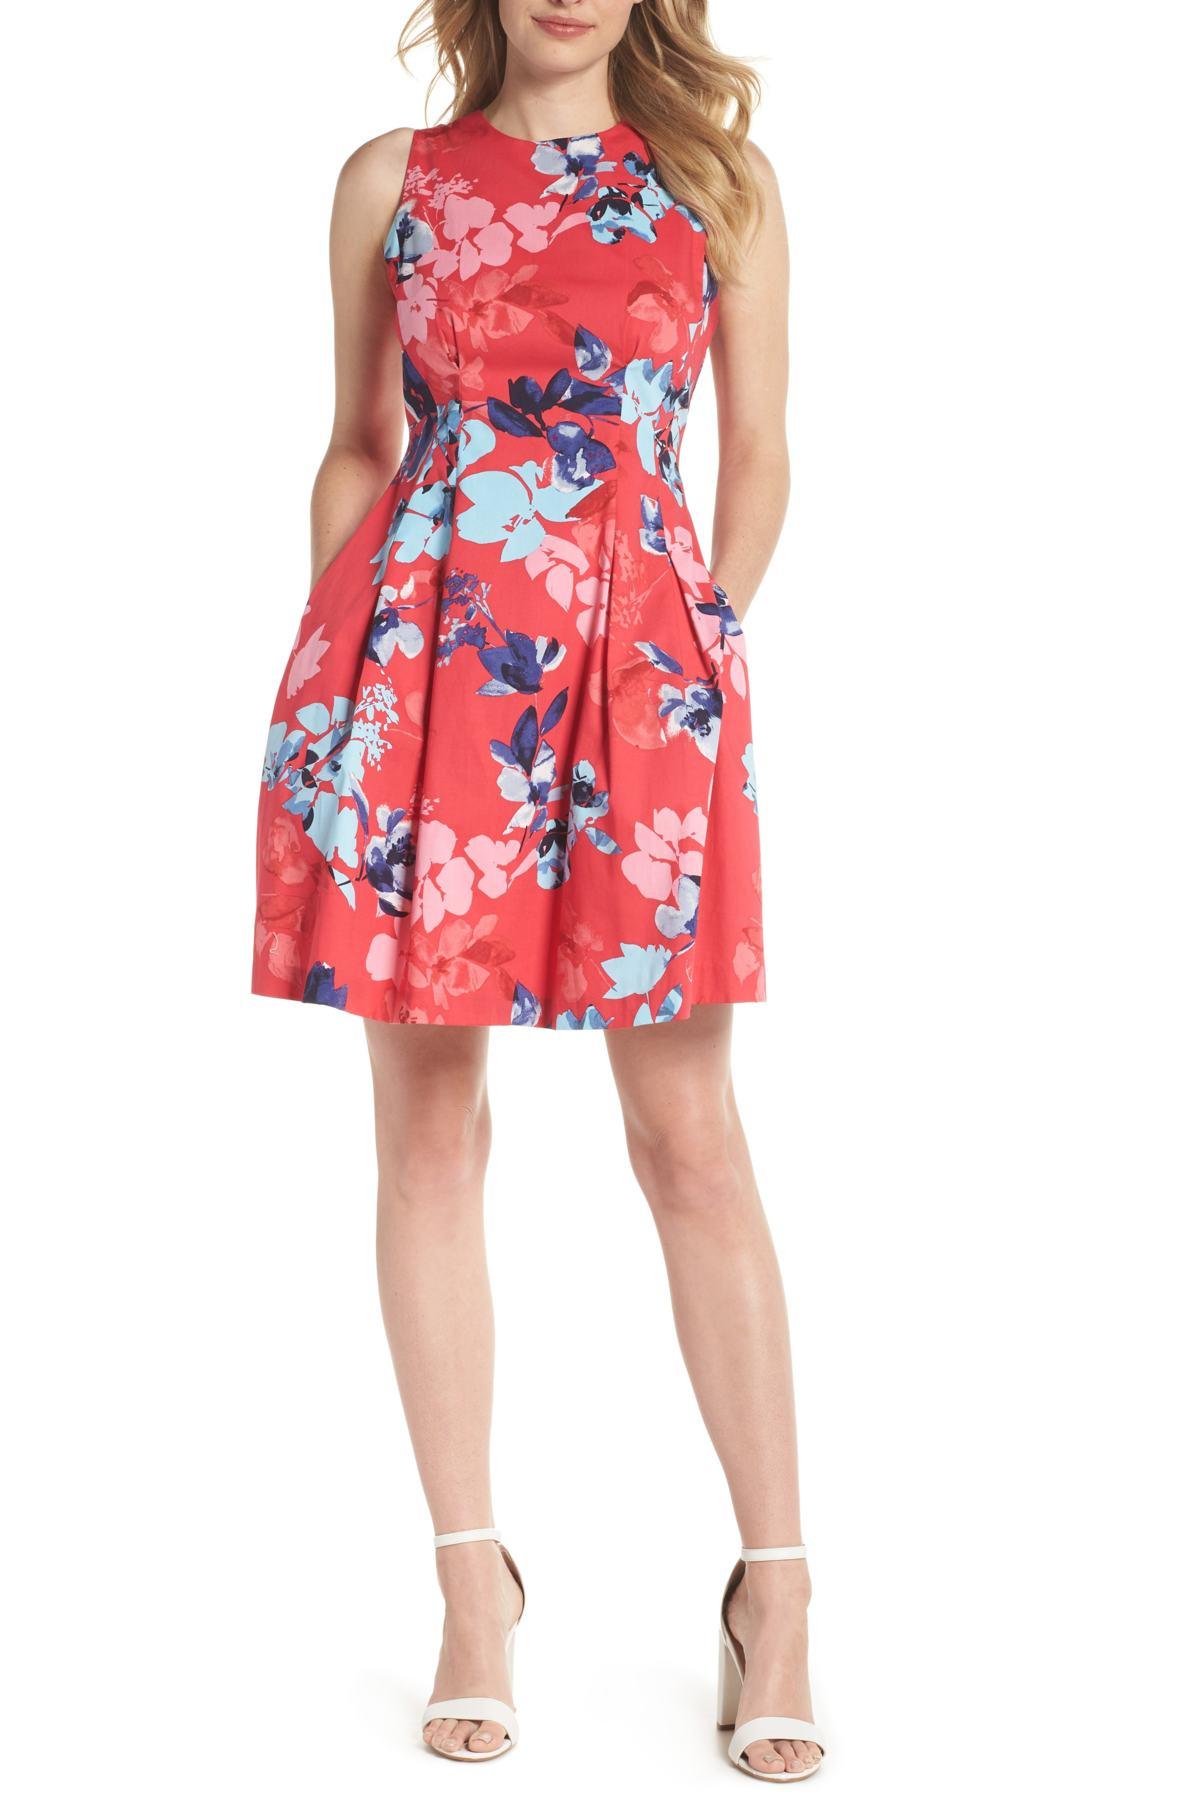 Vince Camuto Floral Cotton Fit & Flare Dress in Pink - Lyst